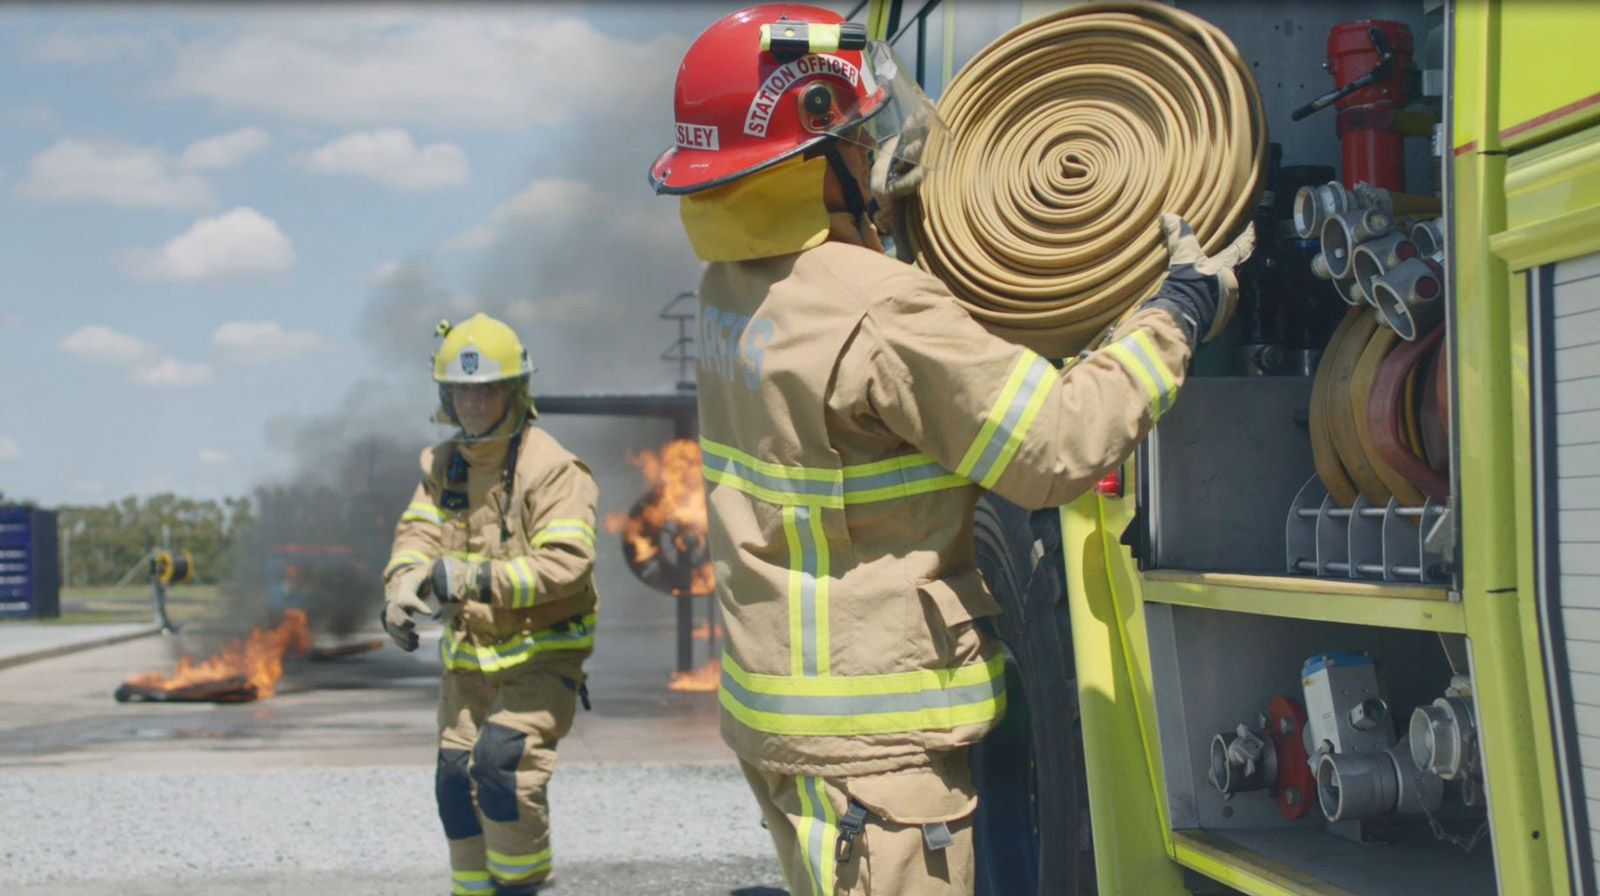 Regular exercises and drills are a big part of the job for Aviation Fire Fighters